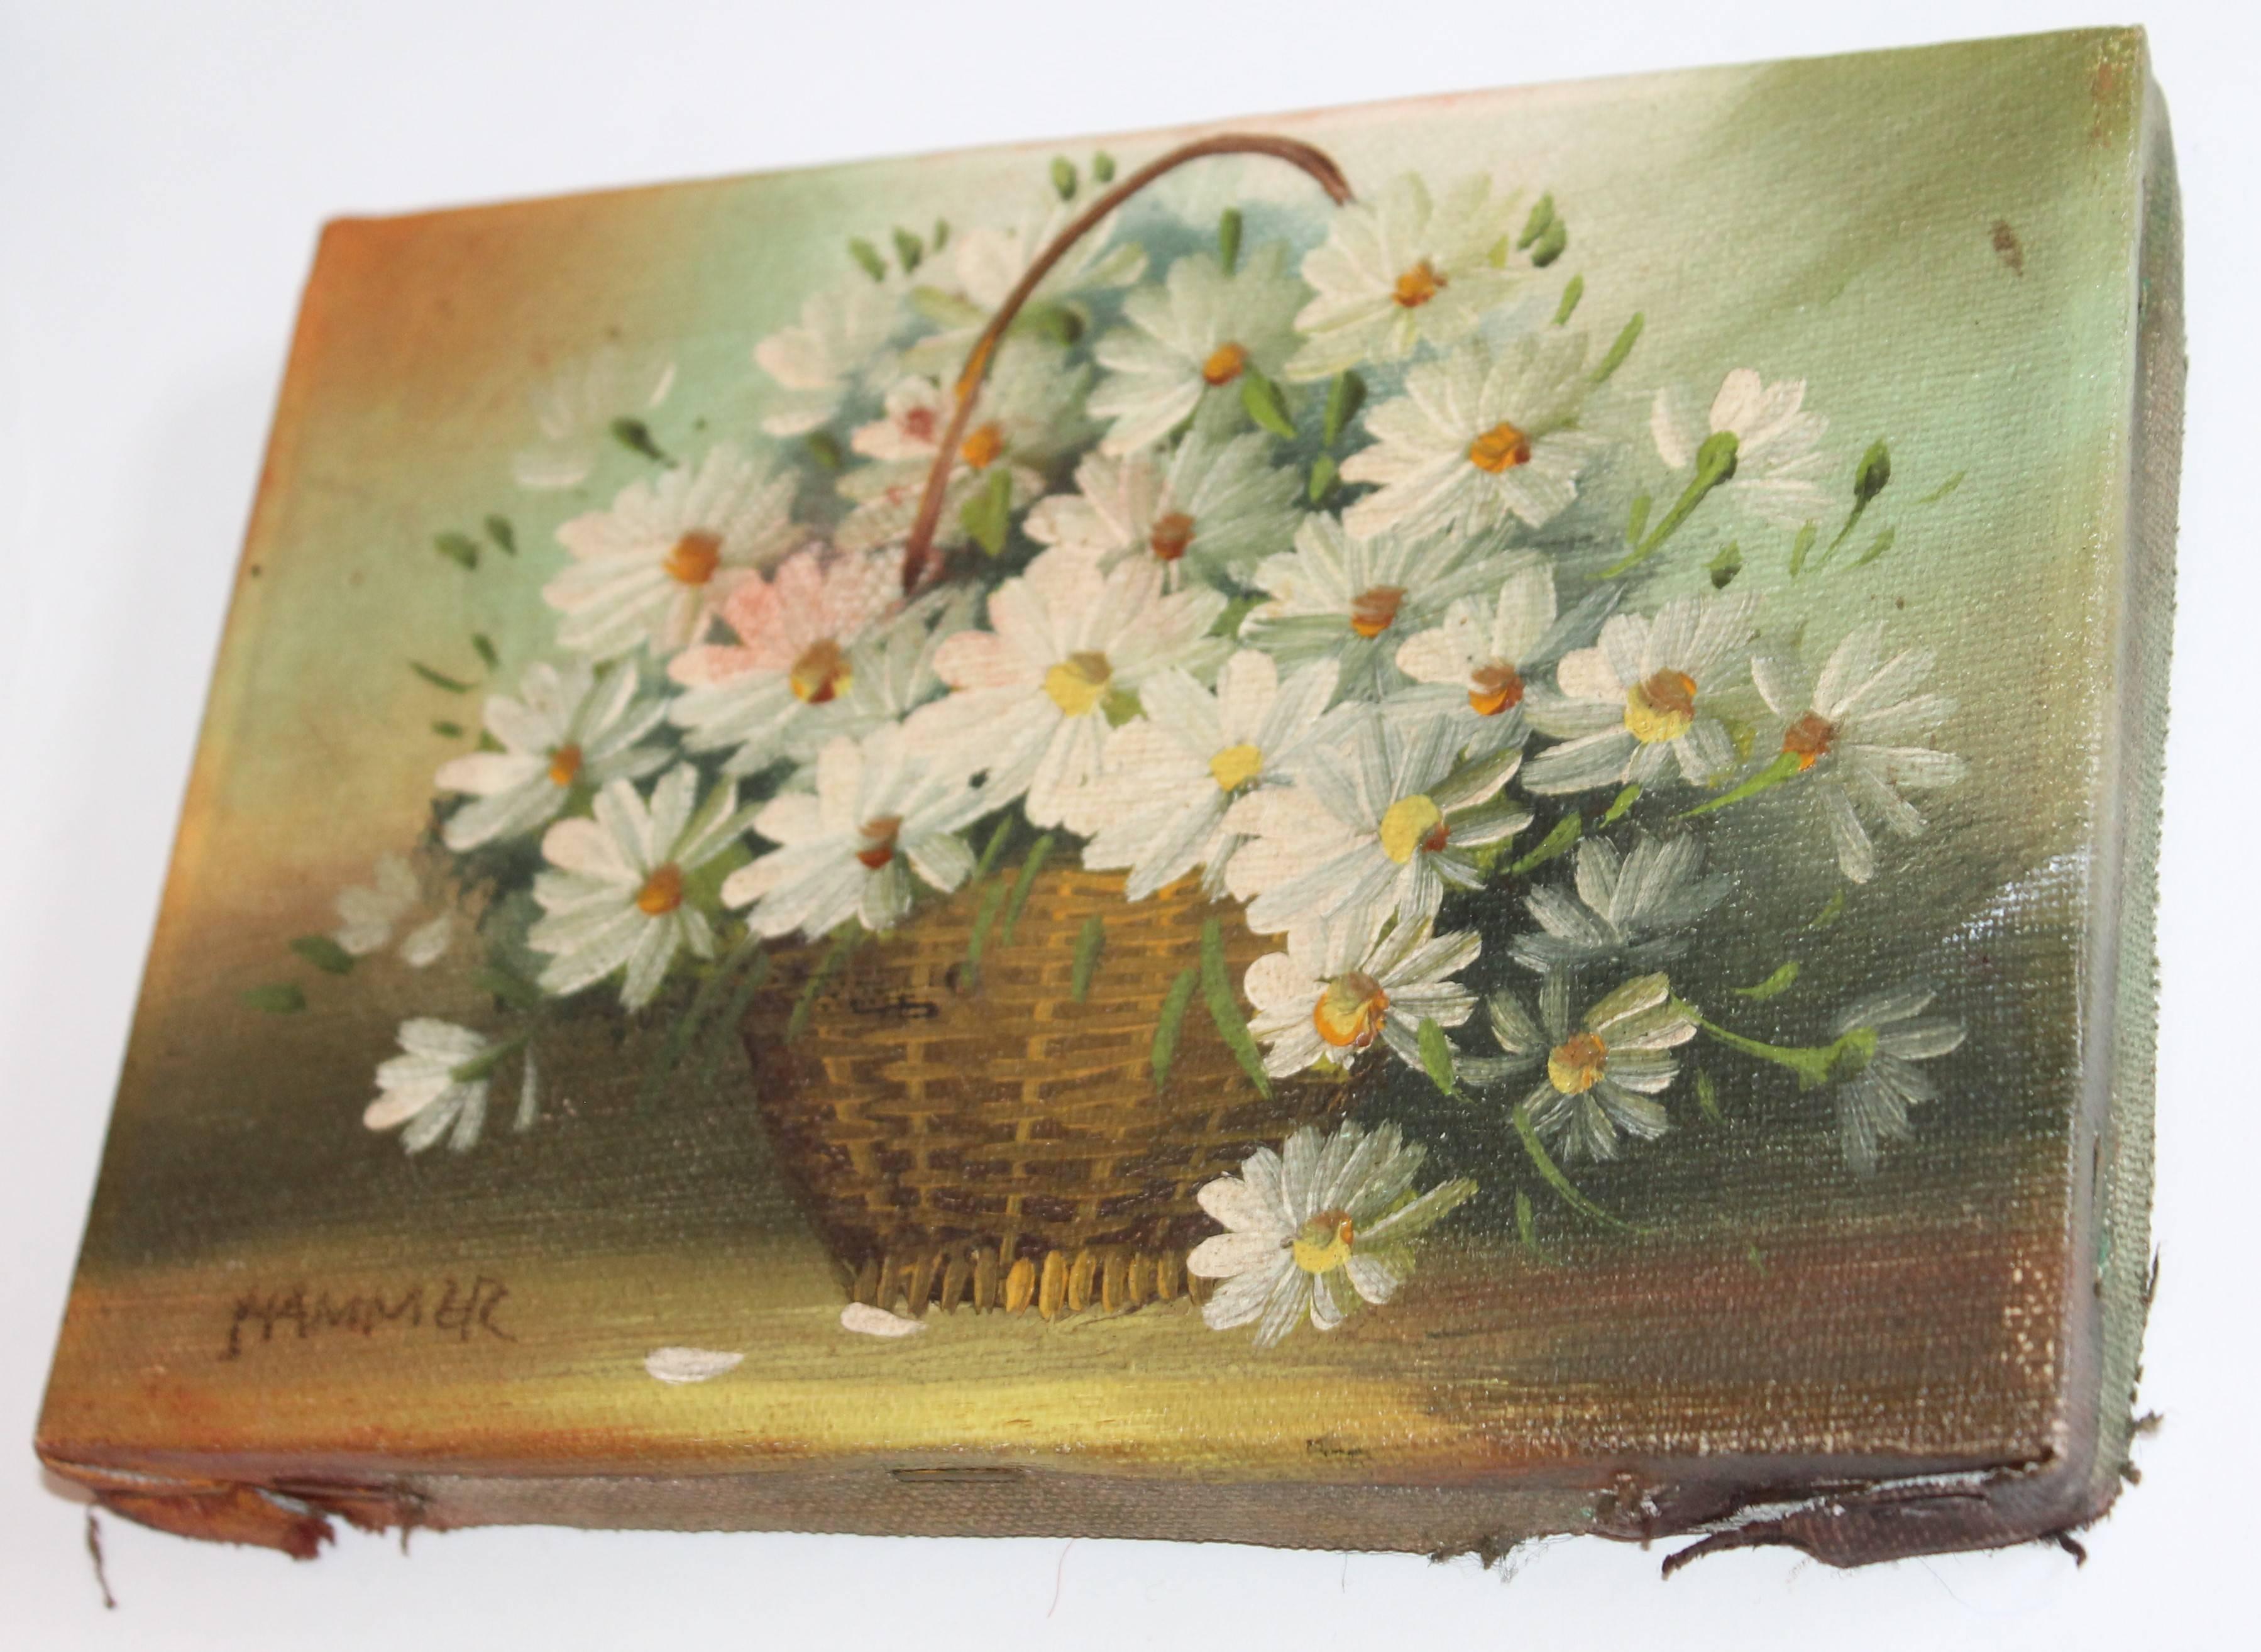 This fantastic little wonder is signed HAMMER and is a country mustard painted basket filled with flowers. Fantastic details and work.